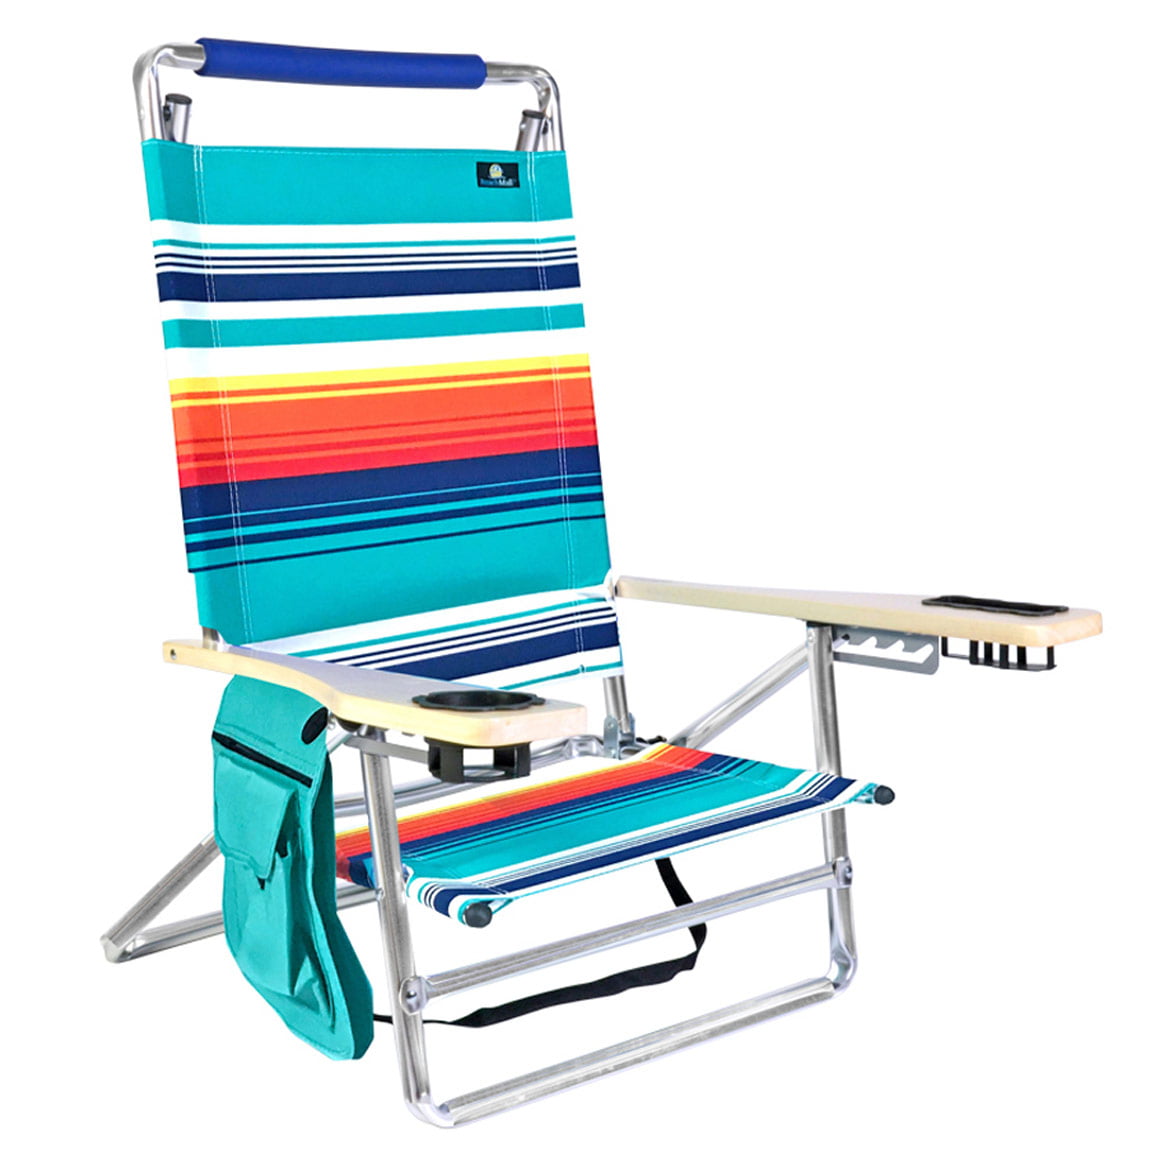 Deluxe 5 pos Lay Flat Aluminum Beach Chair w/ Cup Holder